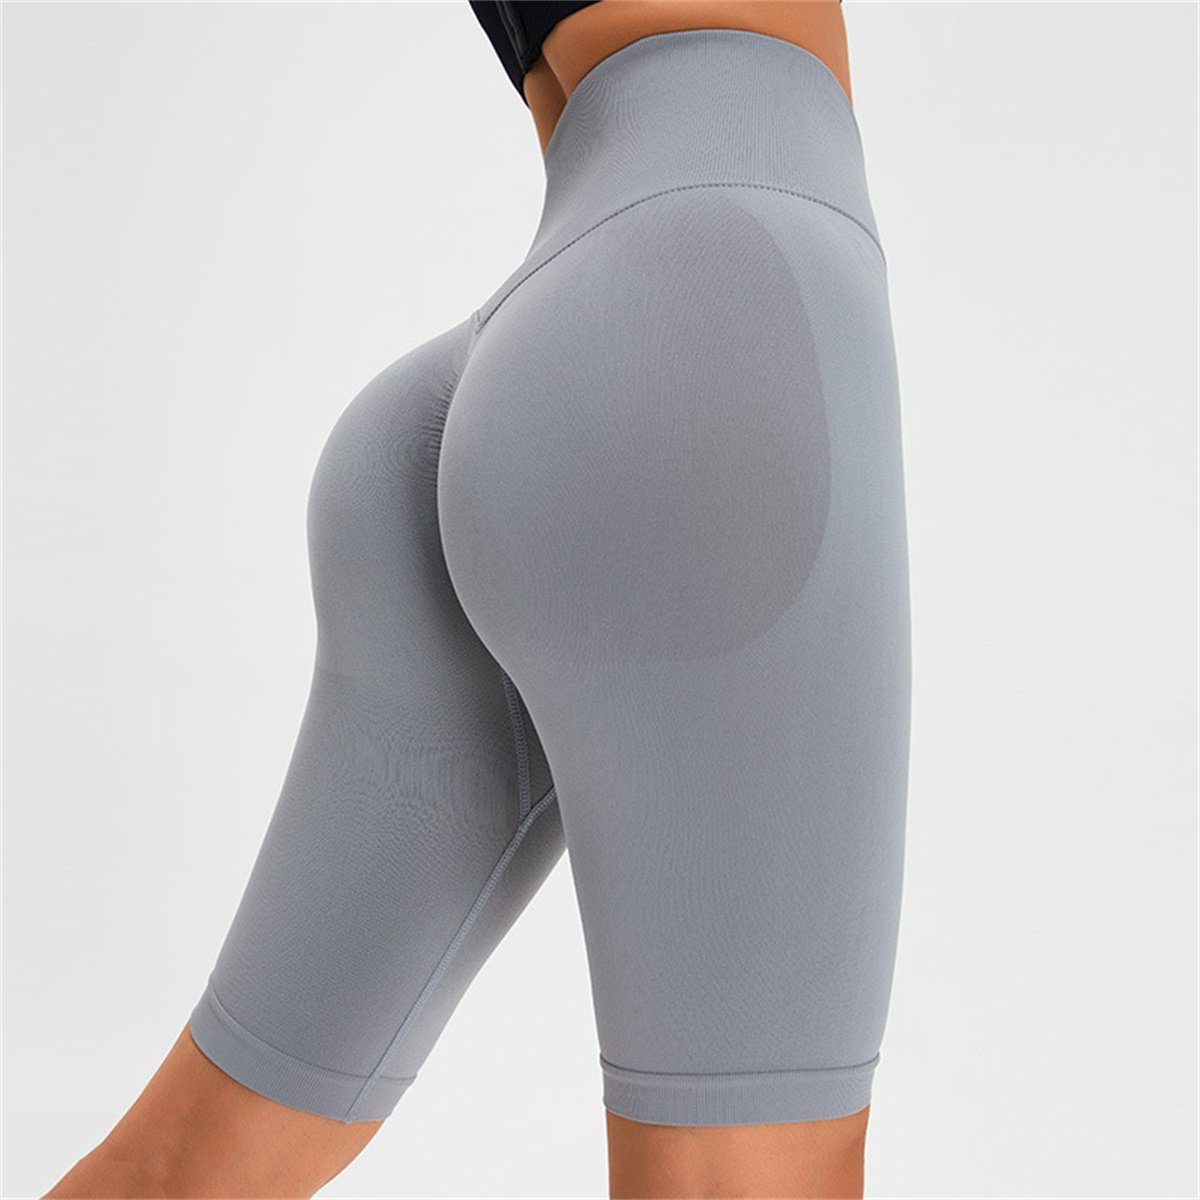 carefully selected grau Taille Damen-Fitness-Po-Lifting-Yoga-Shorts mit hoher Yogatights